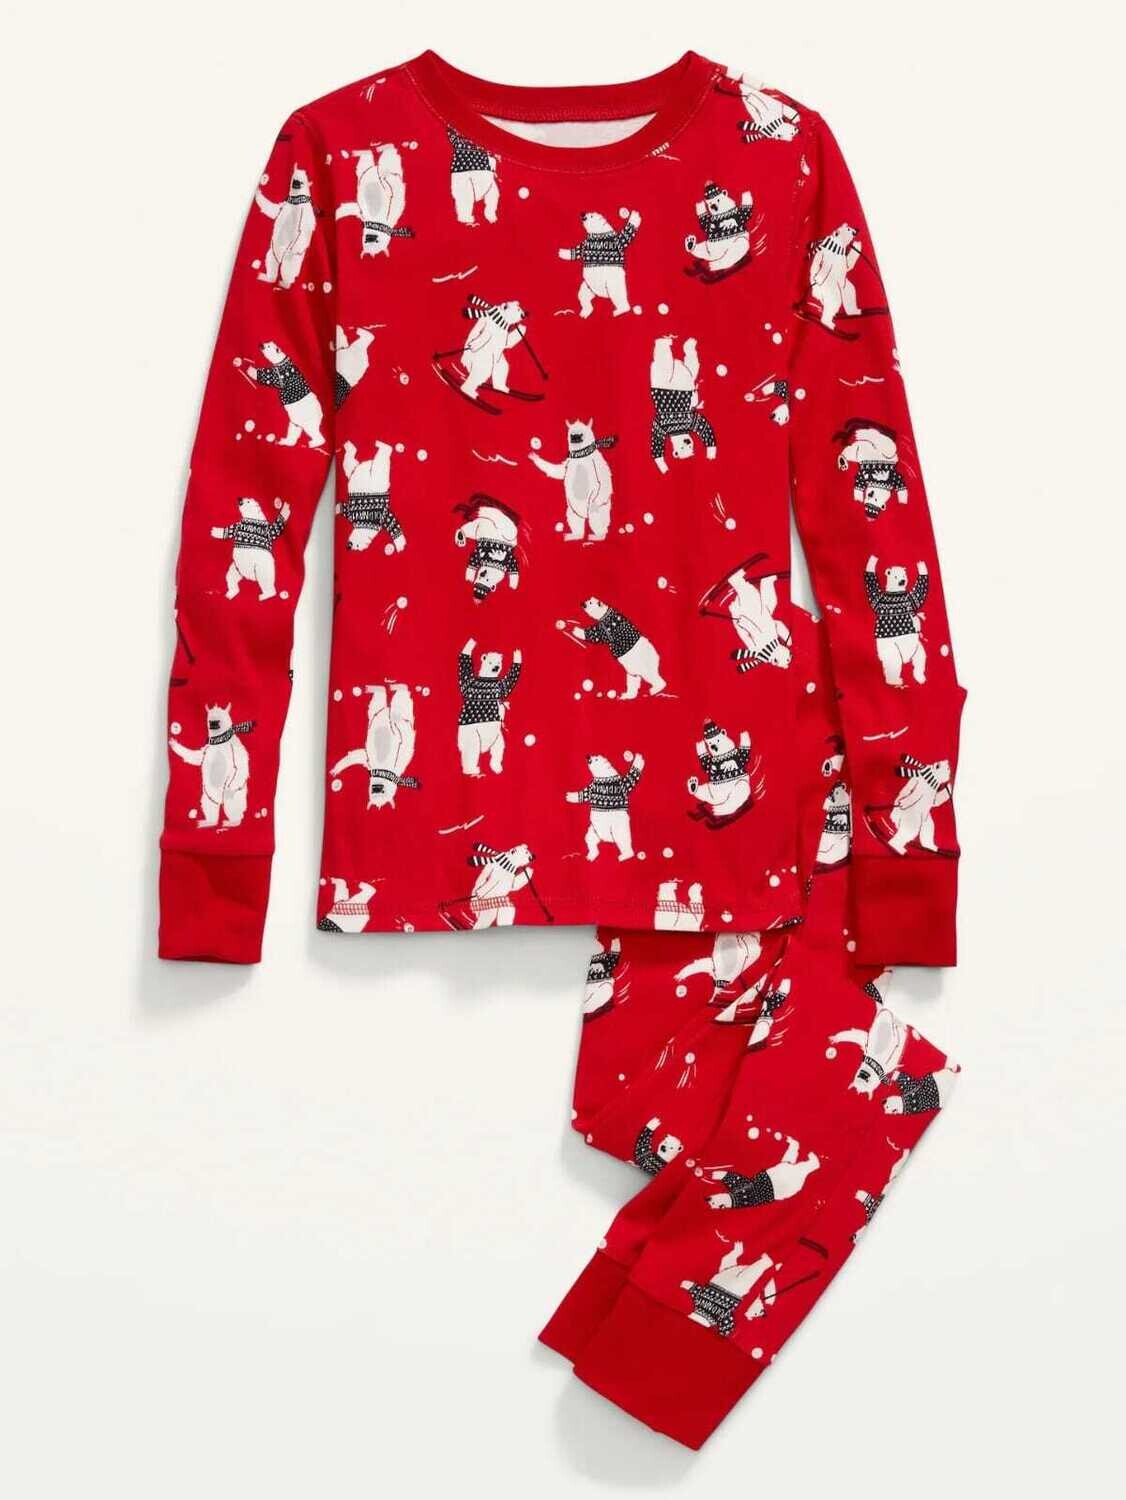 Old Navy Holiday Matching Graphic Gender-Neutral Snug-Fit 2-Piece Pajamas Set